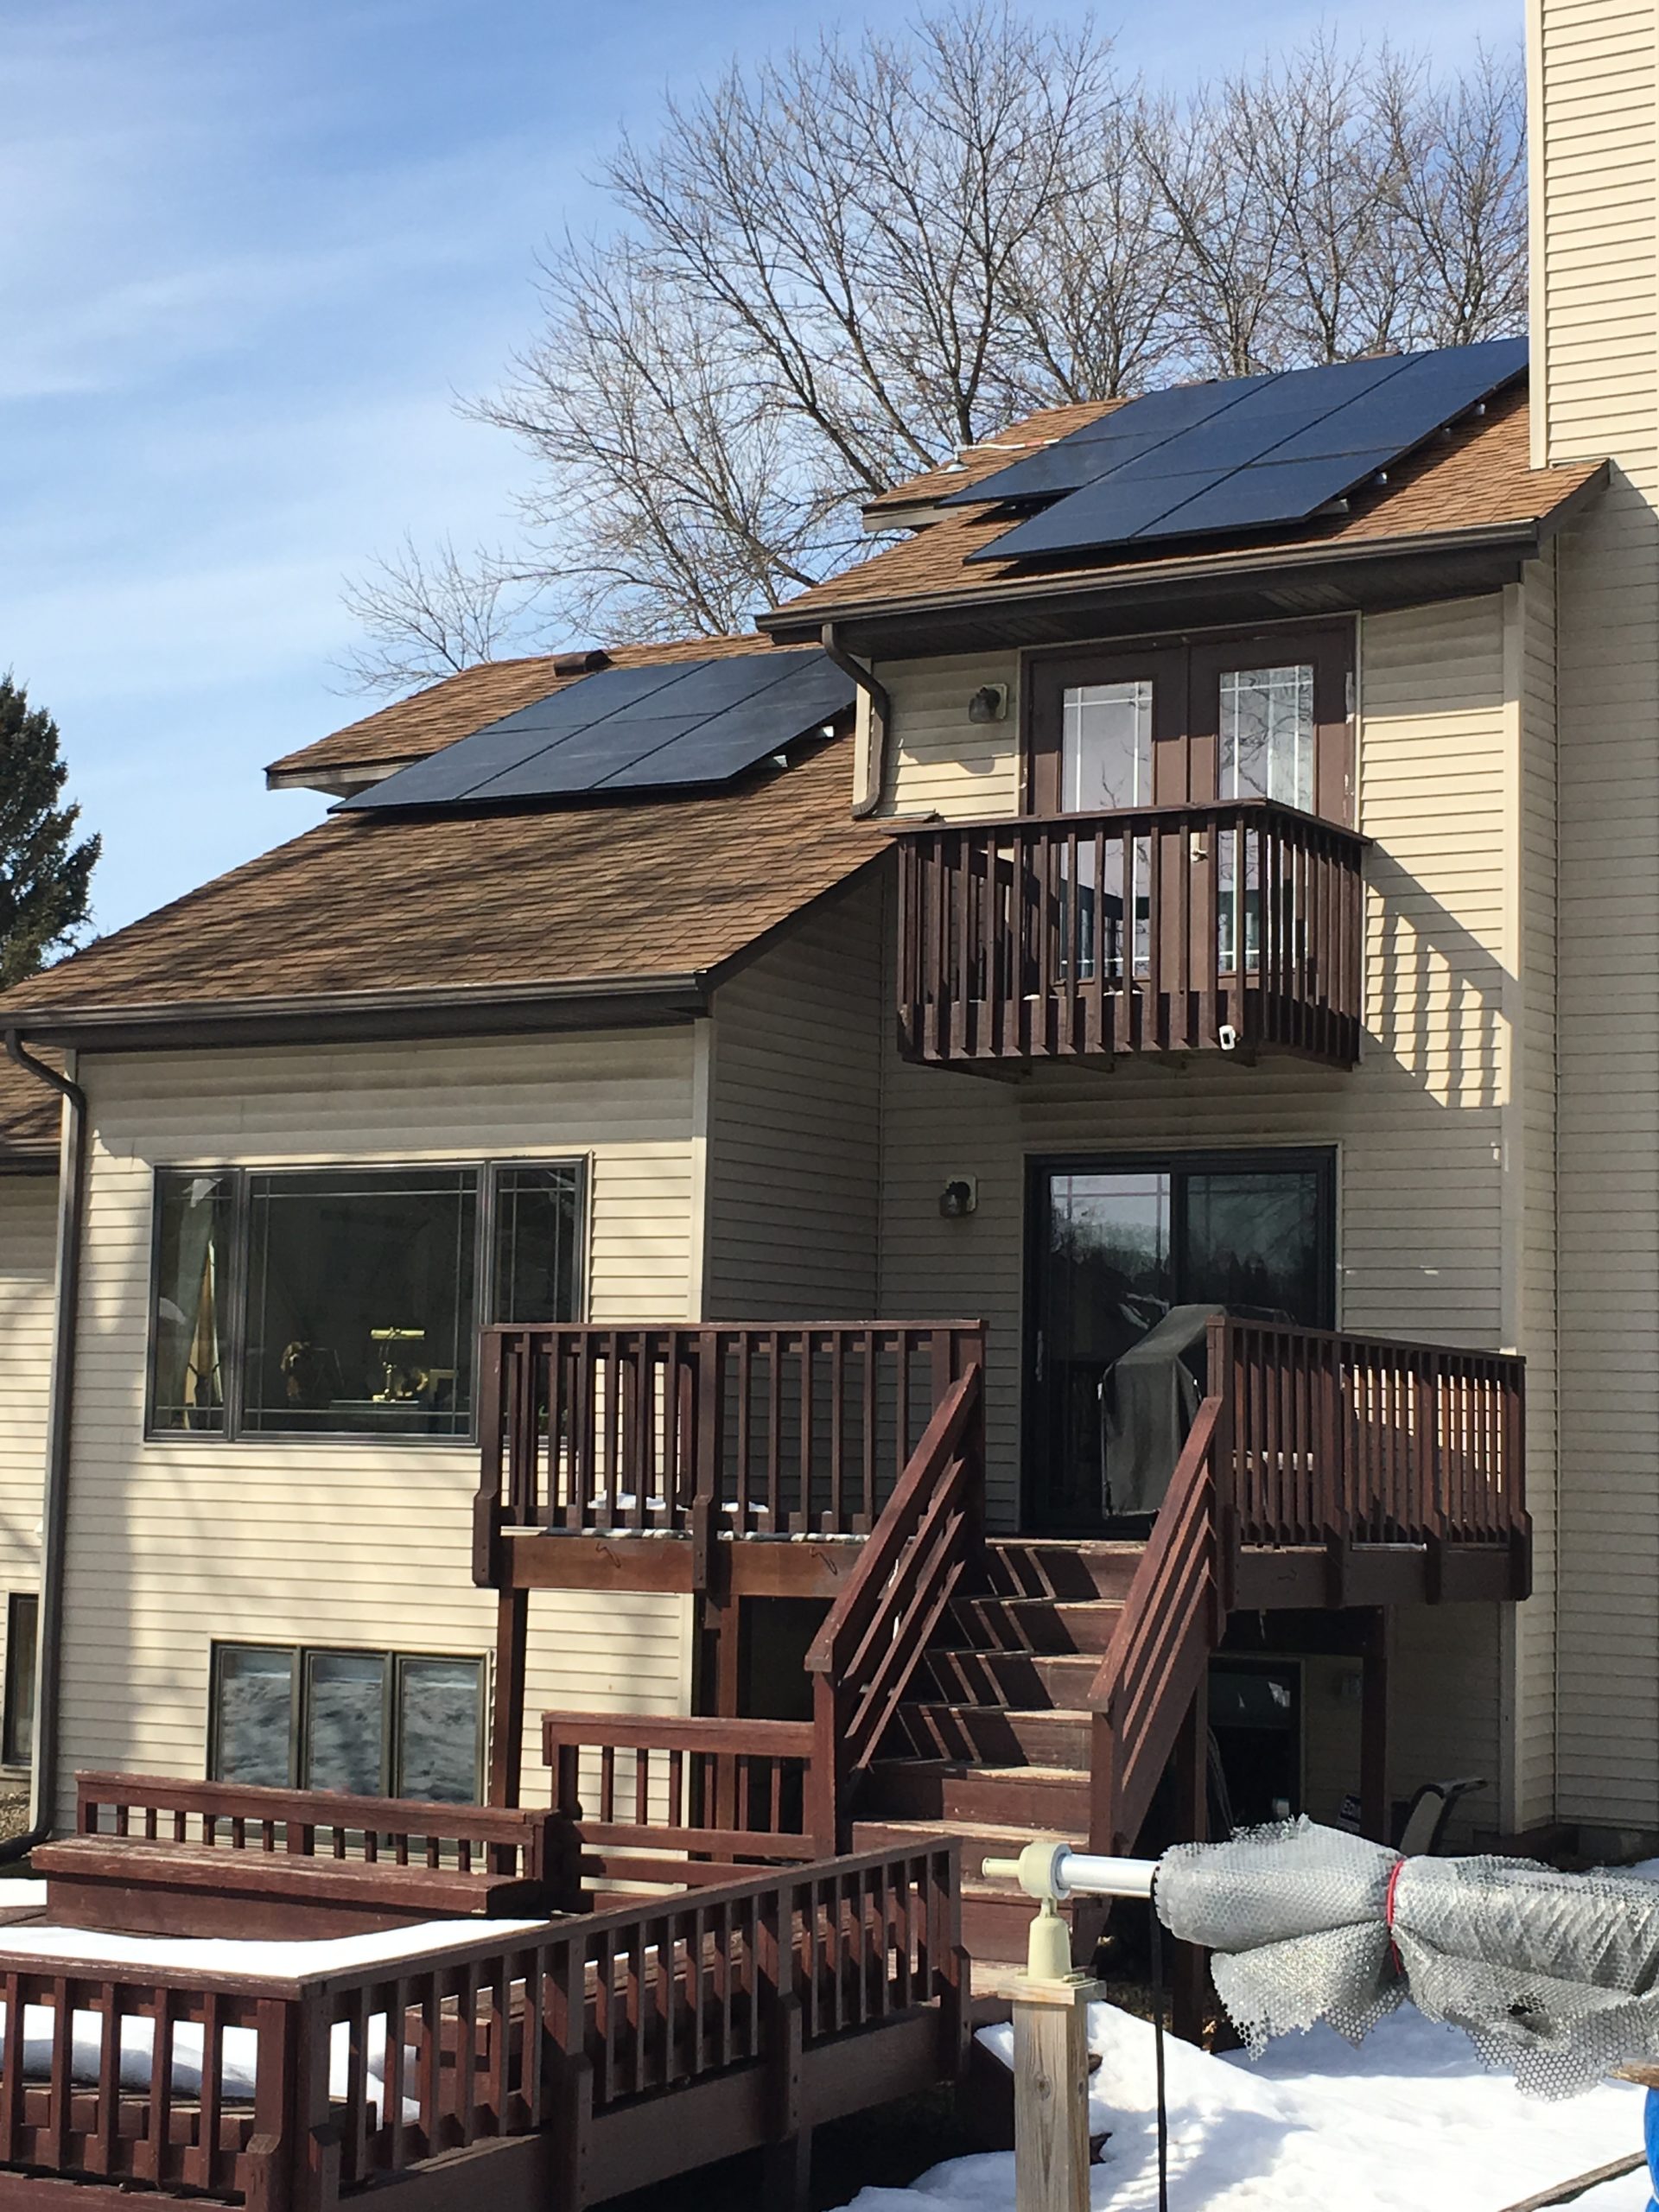 The Advantages of Solar Energy: Why Switching to Solar Panels is a Smart Investment